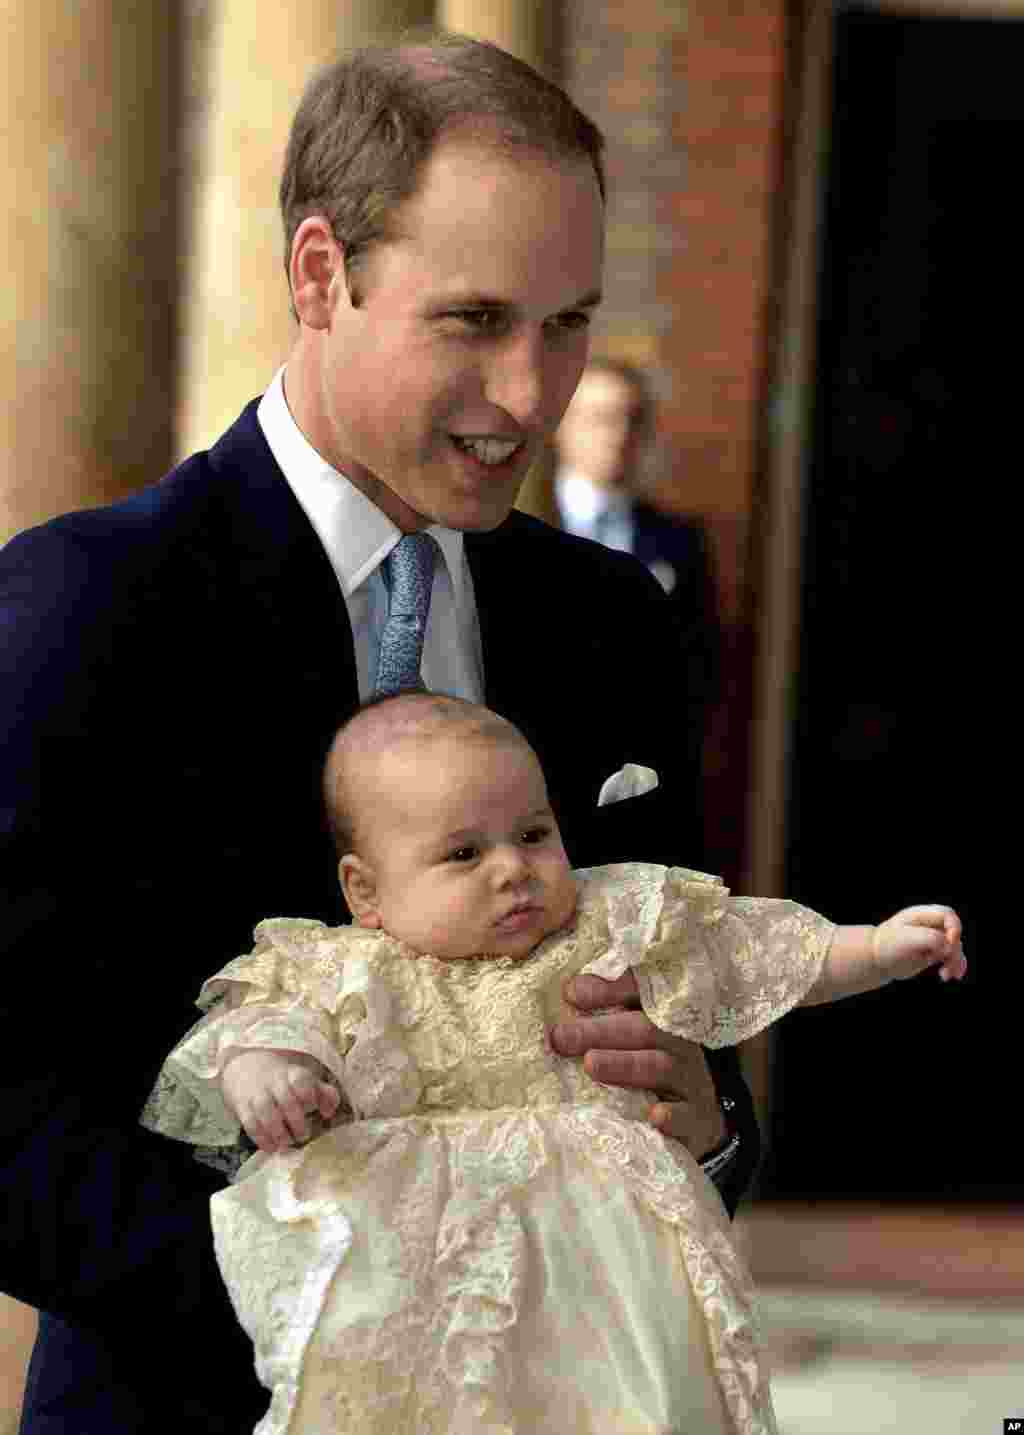 Britain's Prince William, holds his son Prince George as they arrive at Chapel Royal in St James's Palace in London, for the christening of the three month-old Prince, Oct. 23, 2013.